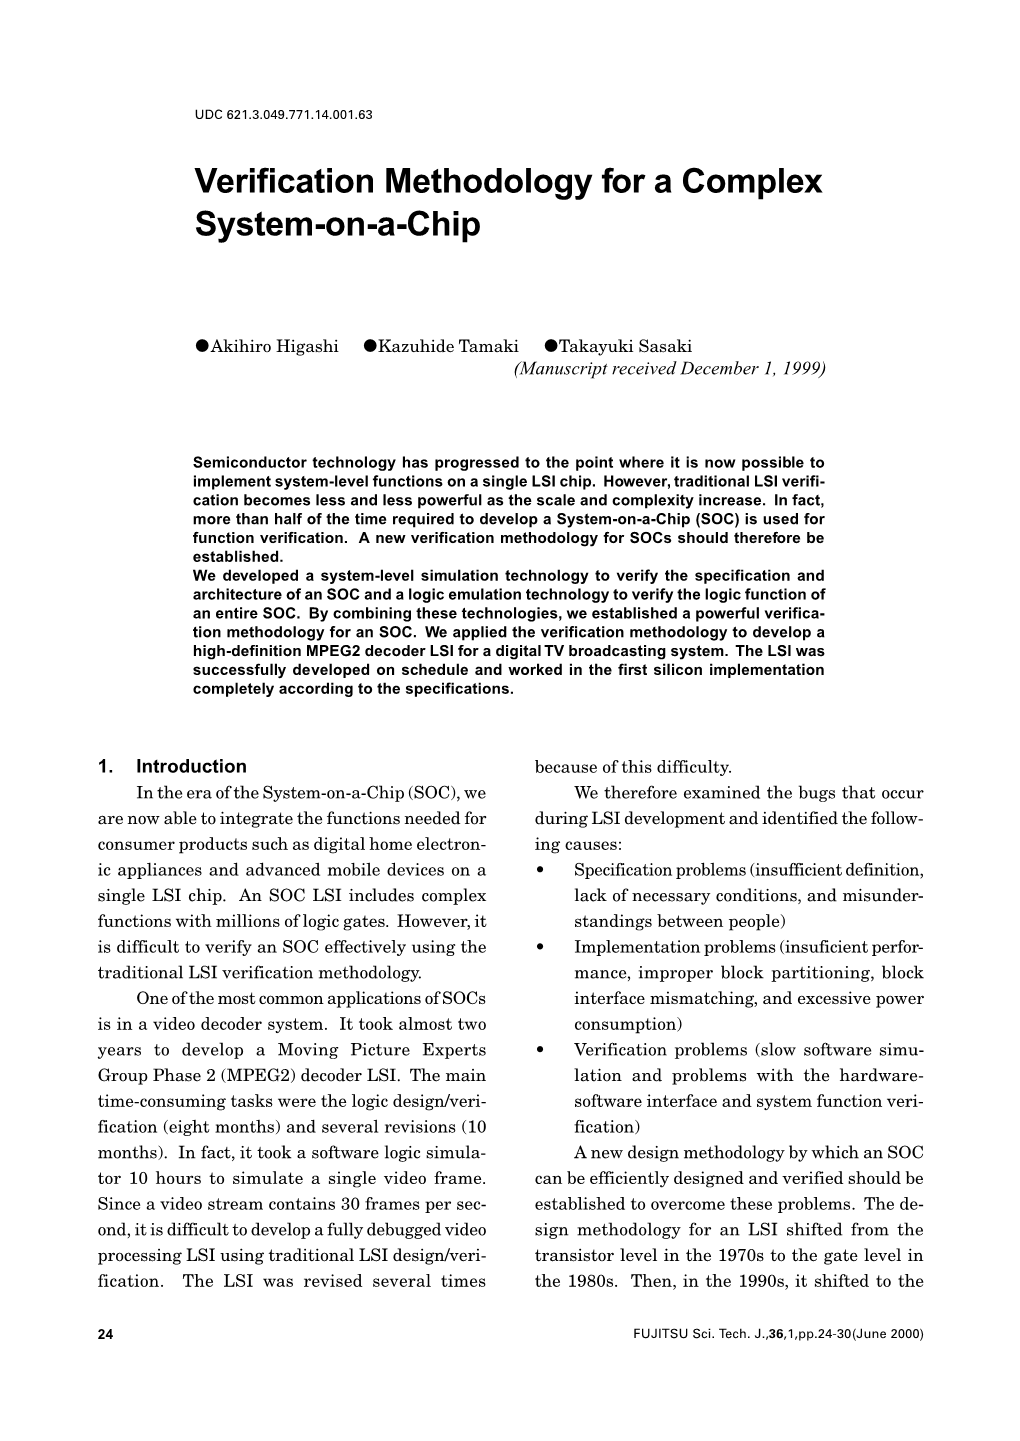 Verification Methodology for a Complex System-On-A-Chip